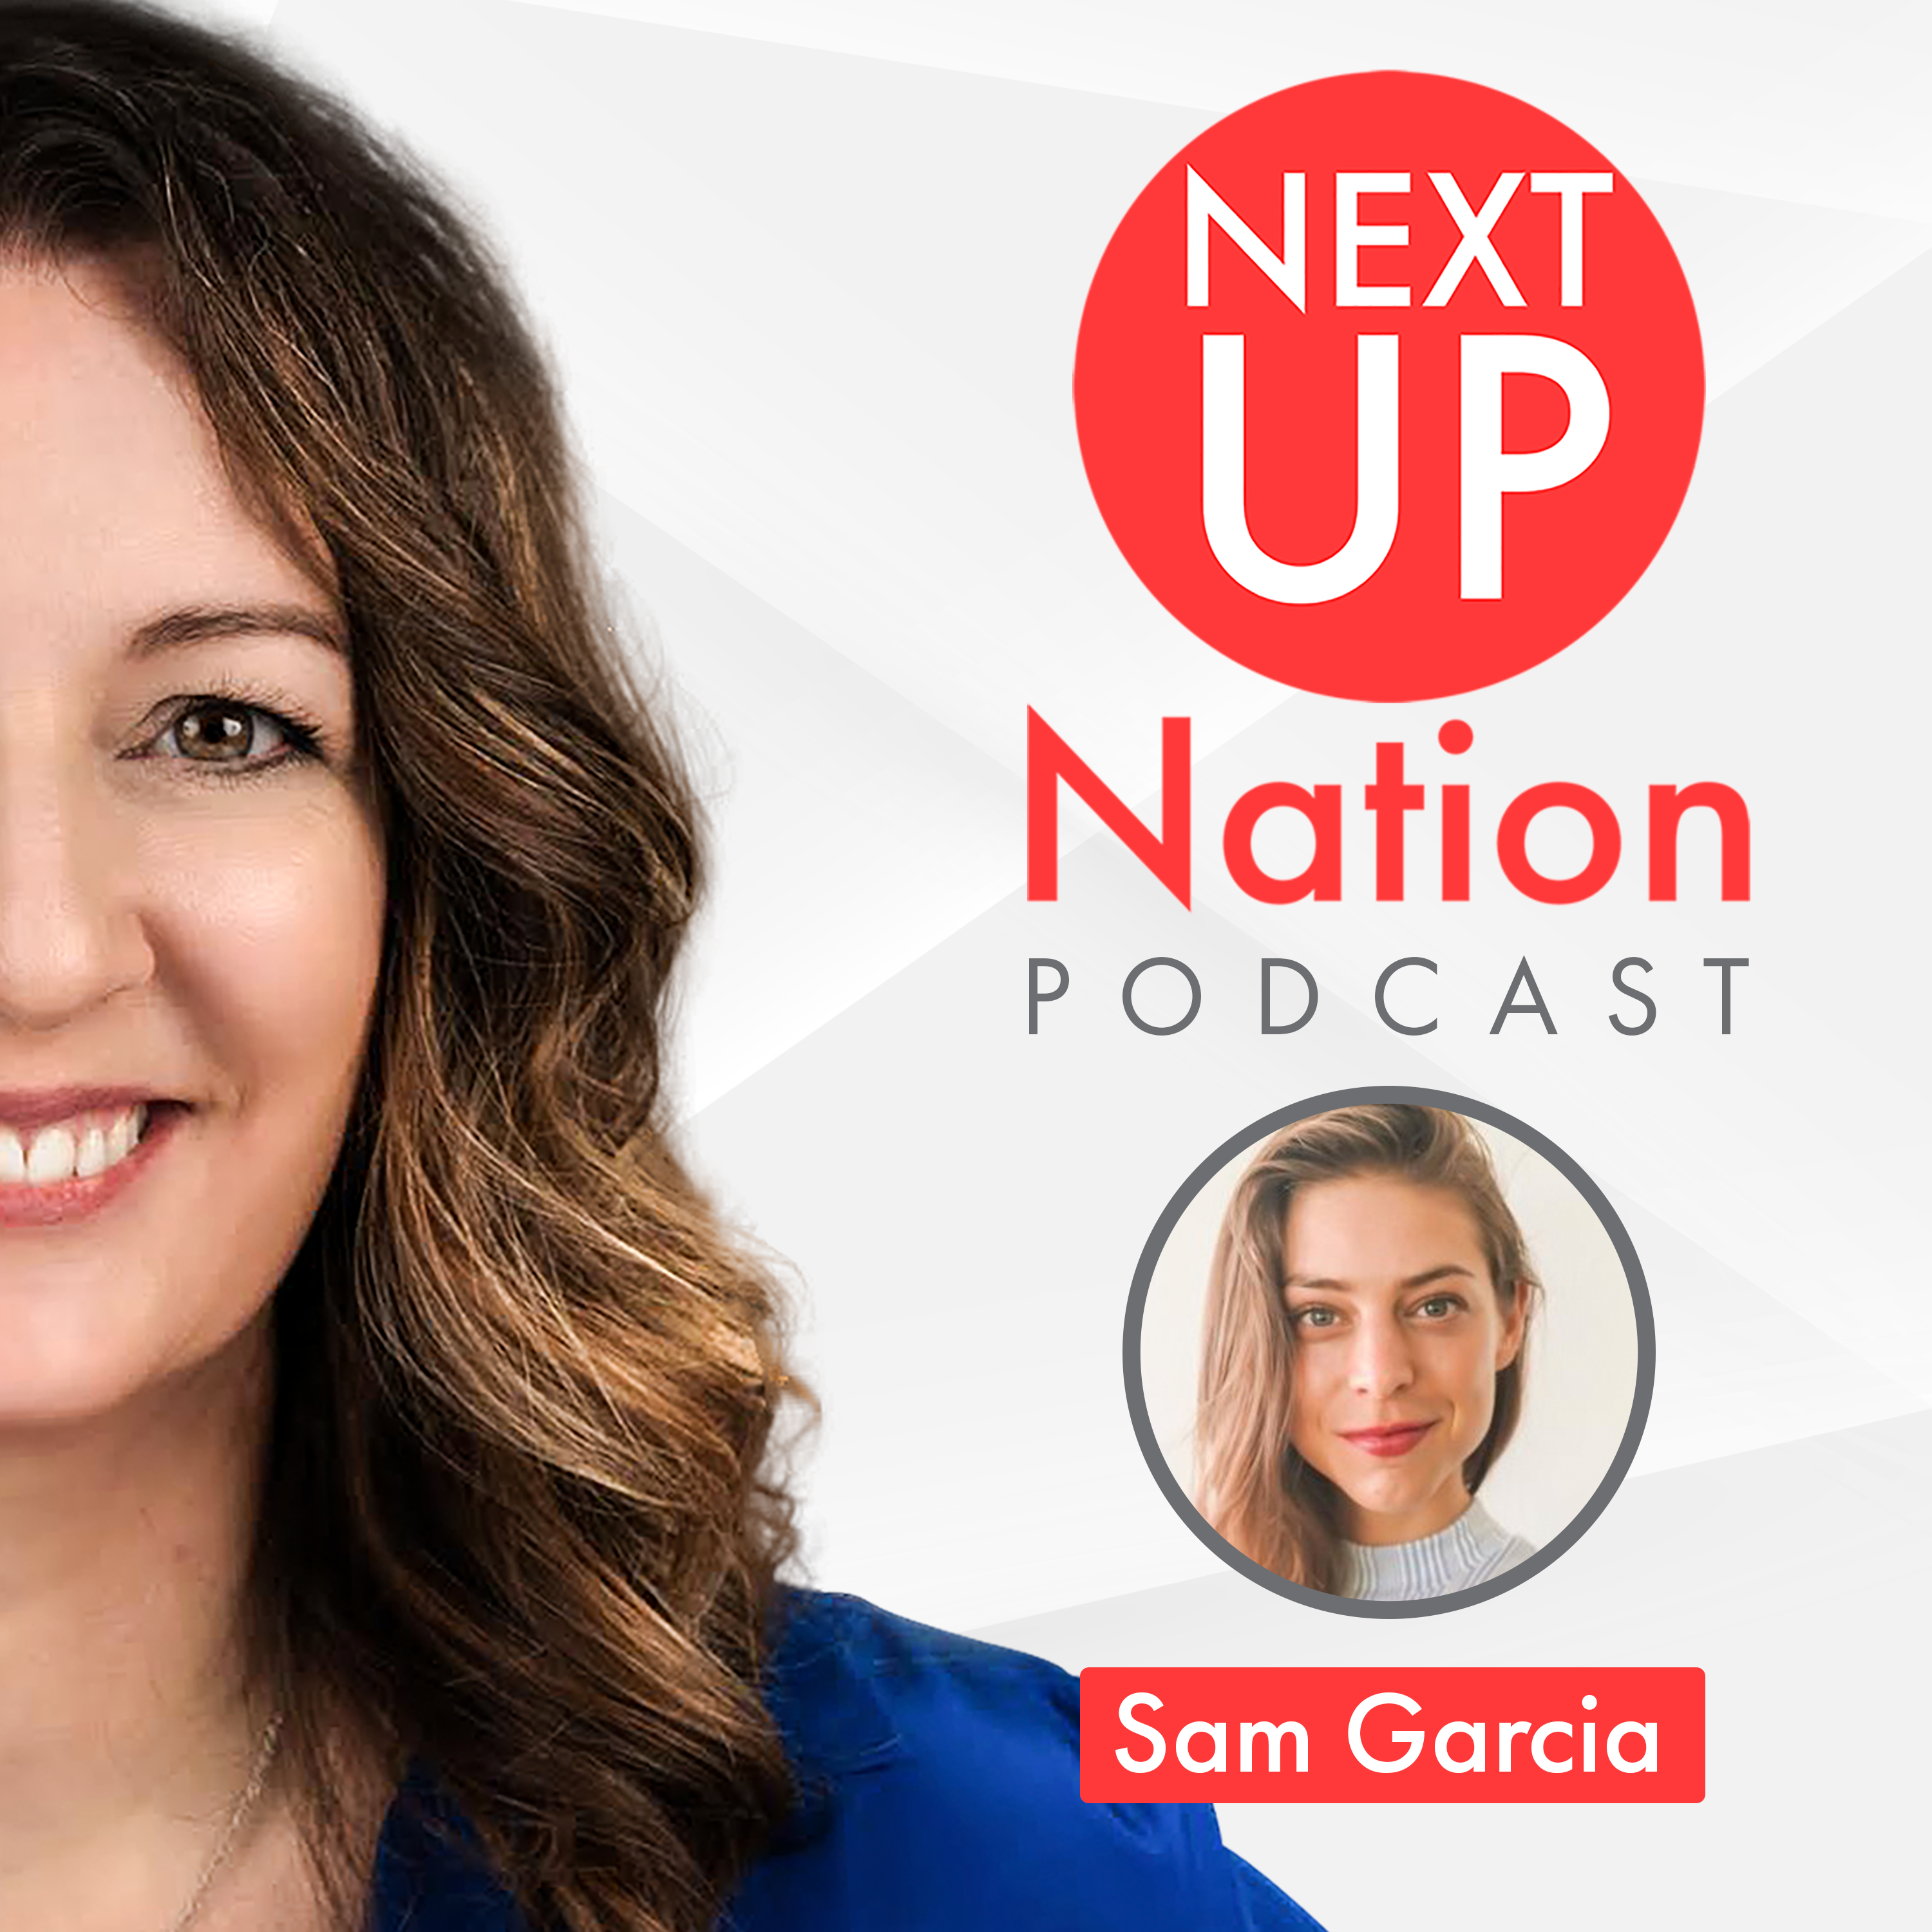 Obsessed with Her Audience, Sam Garcia Makes her Show Irresistible